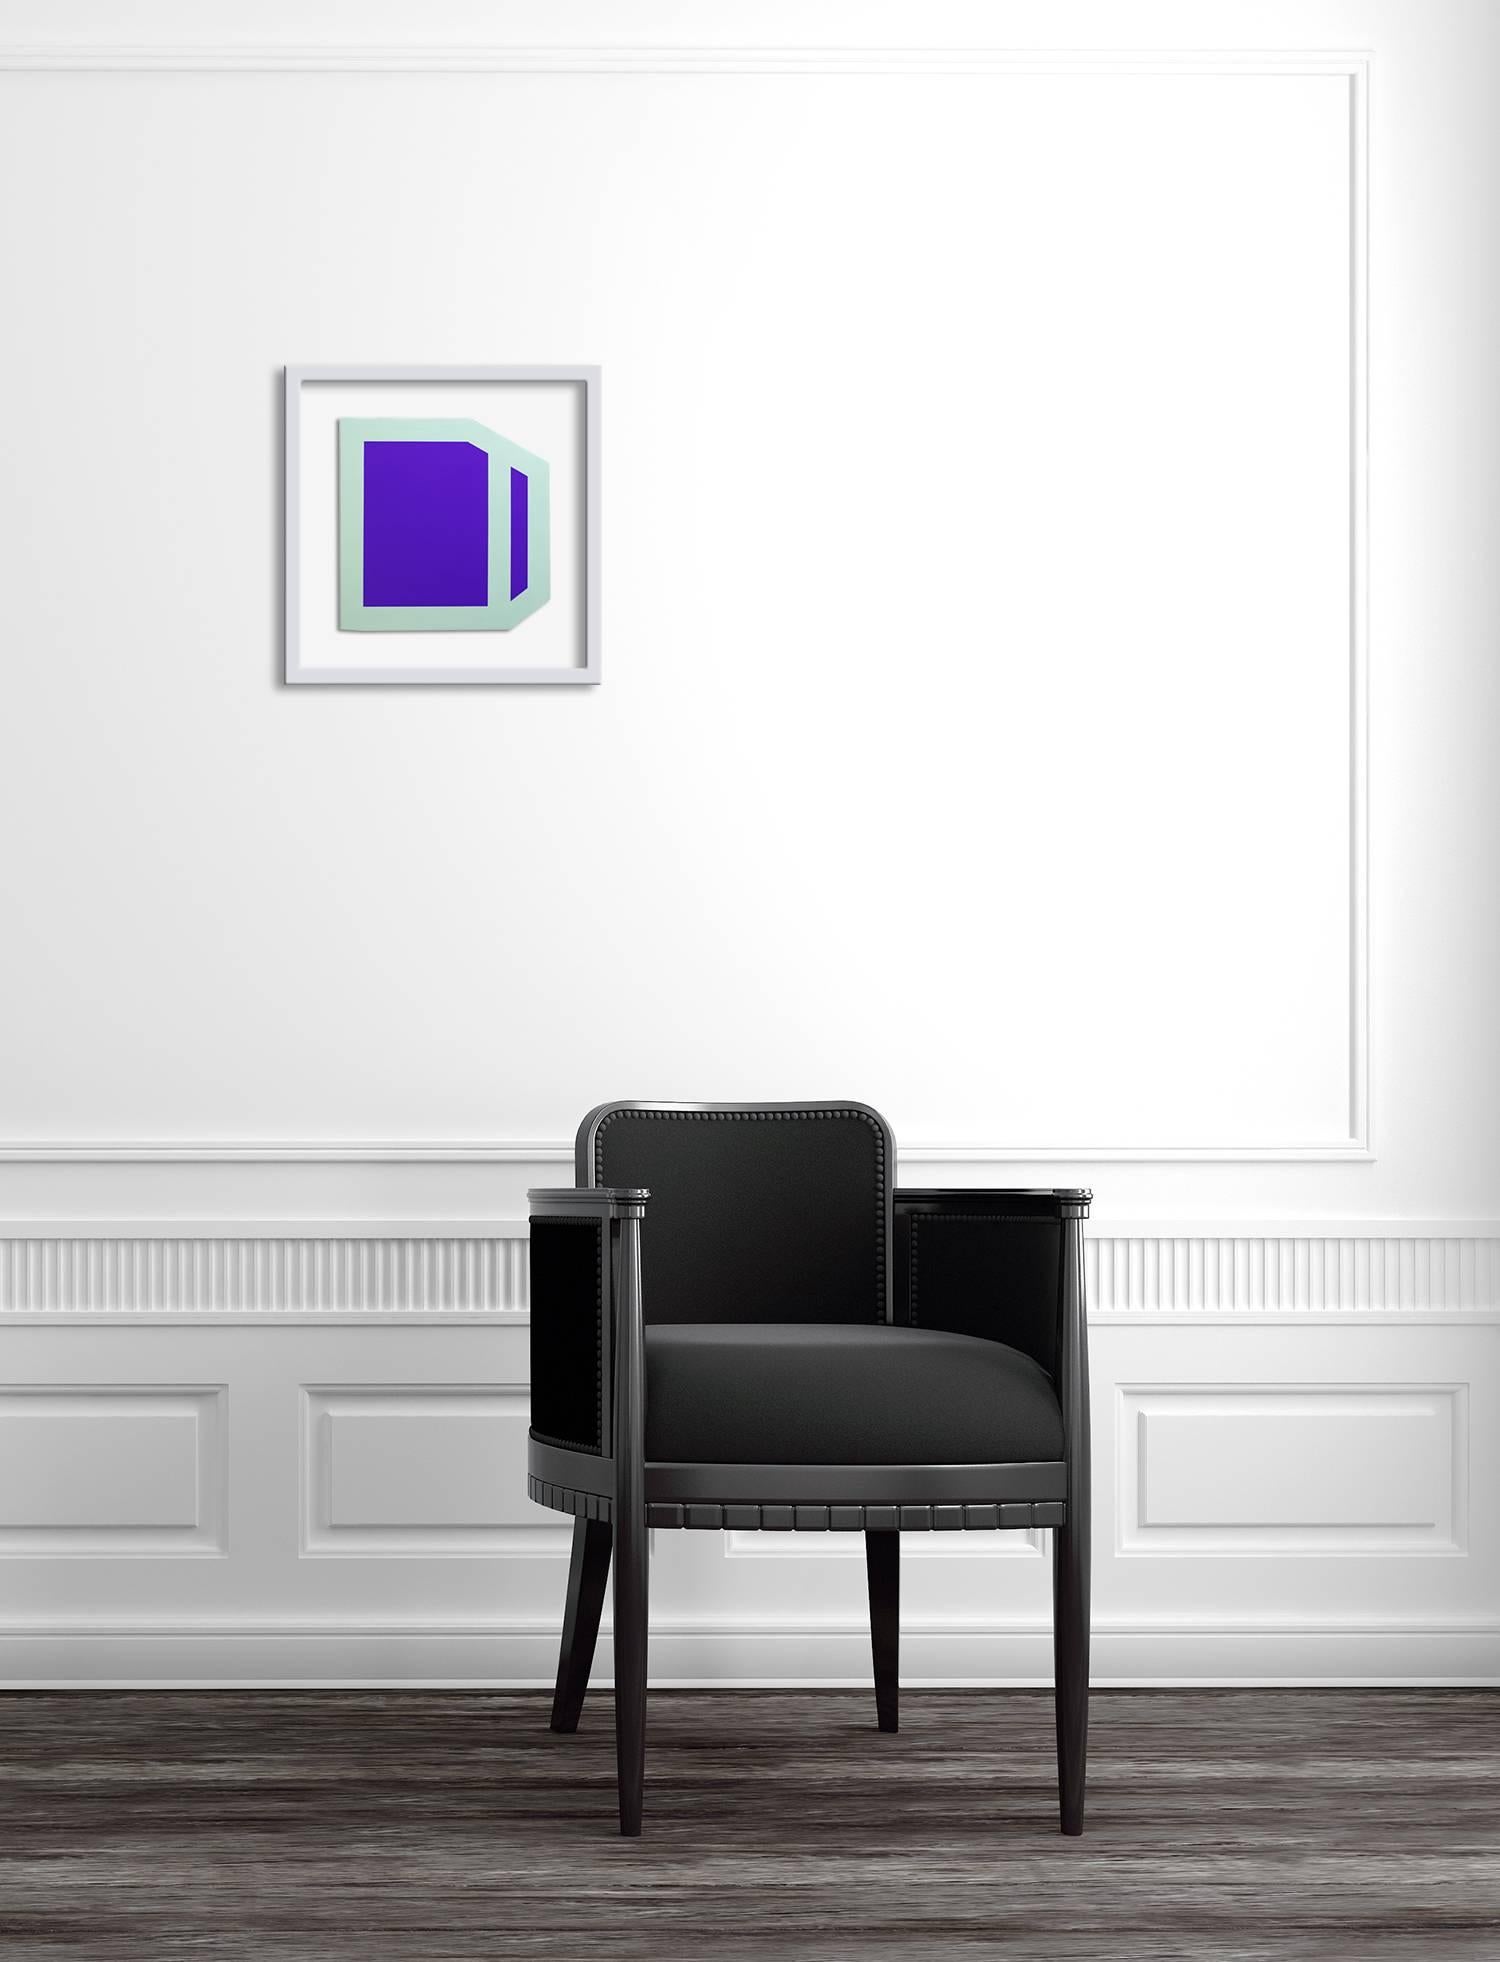 Plumb Purple (mint) (Abstract Painting)

Acrylic on aluminum - Unframed

This piece on aluminum with a line articulating the border creates, seamlessly, an internal shape that squares the image.

Brent Hallard is an Australian-born abstract artist,